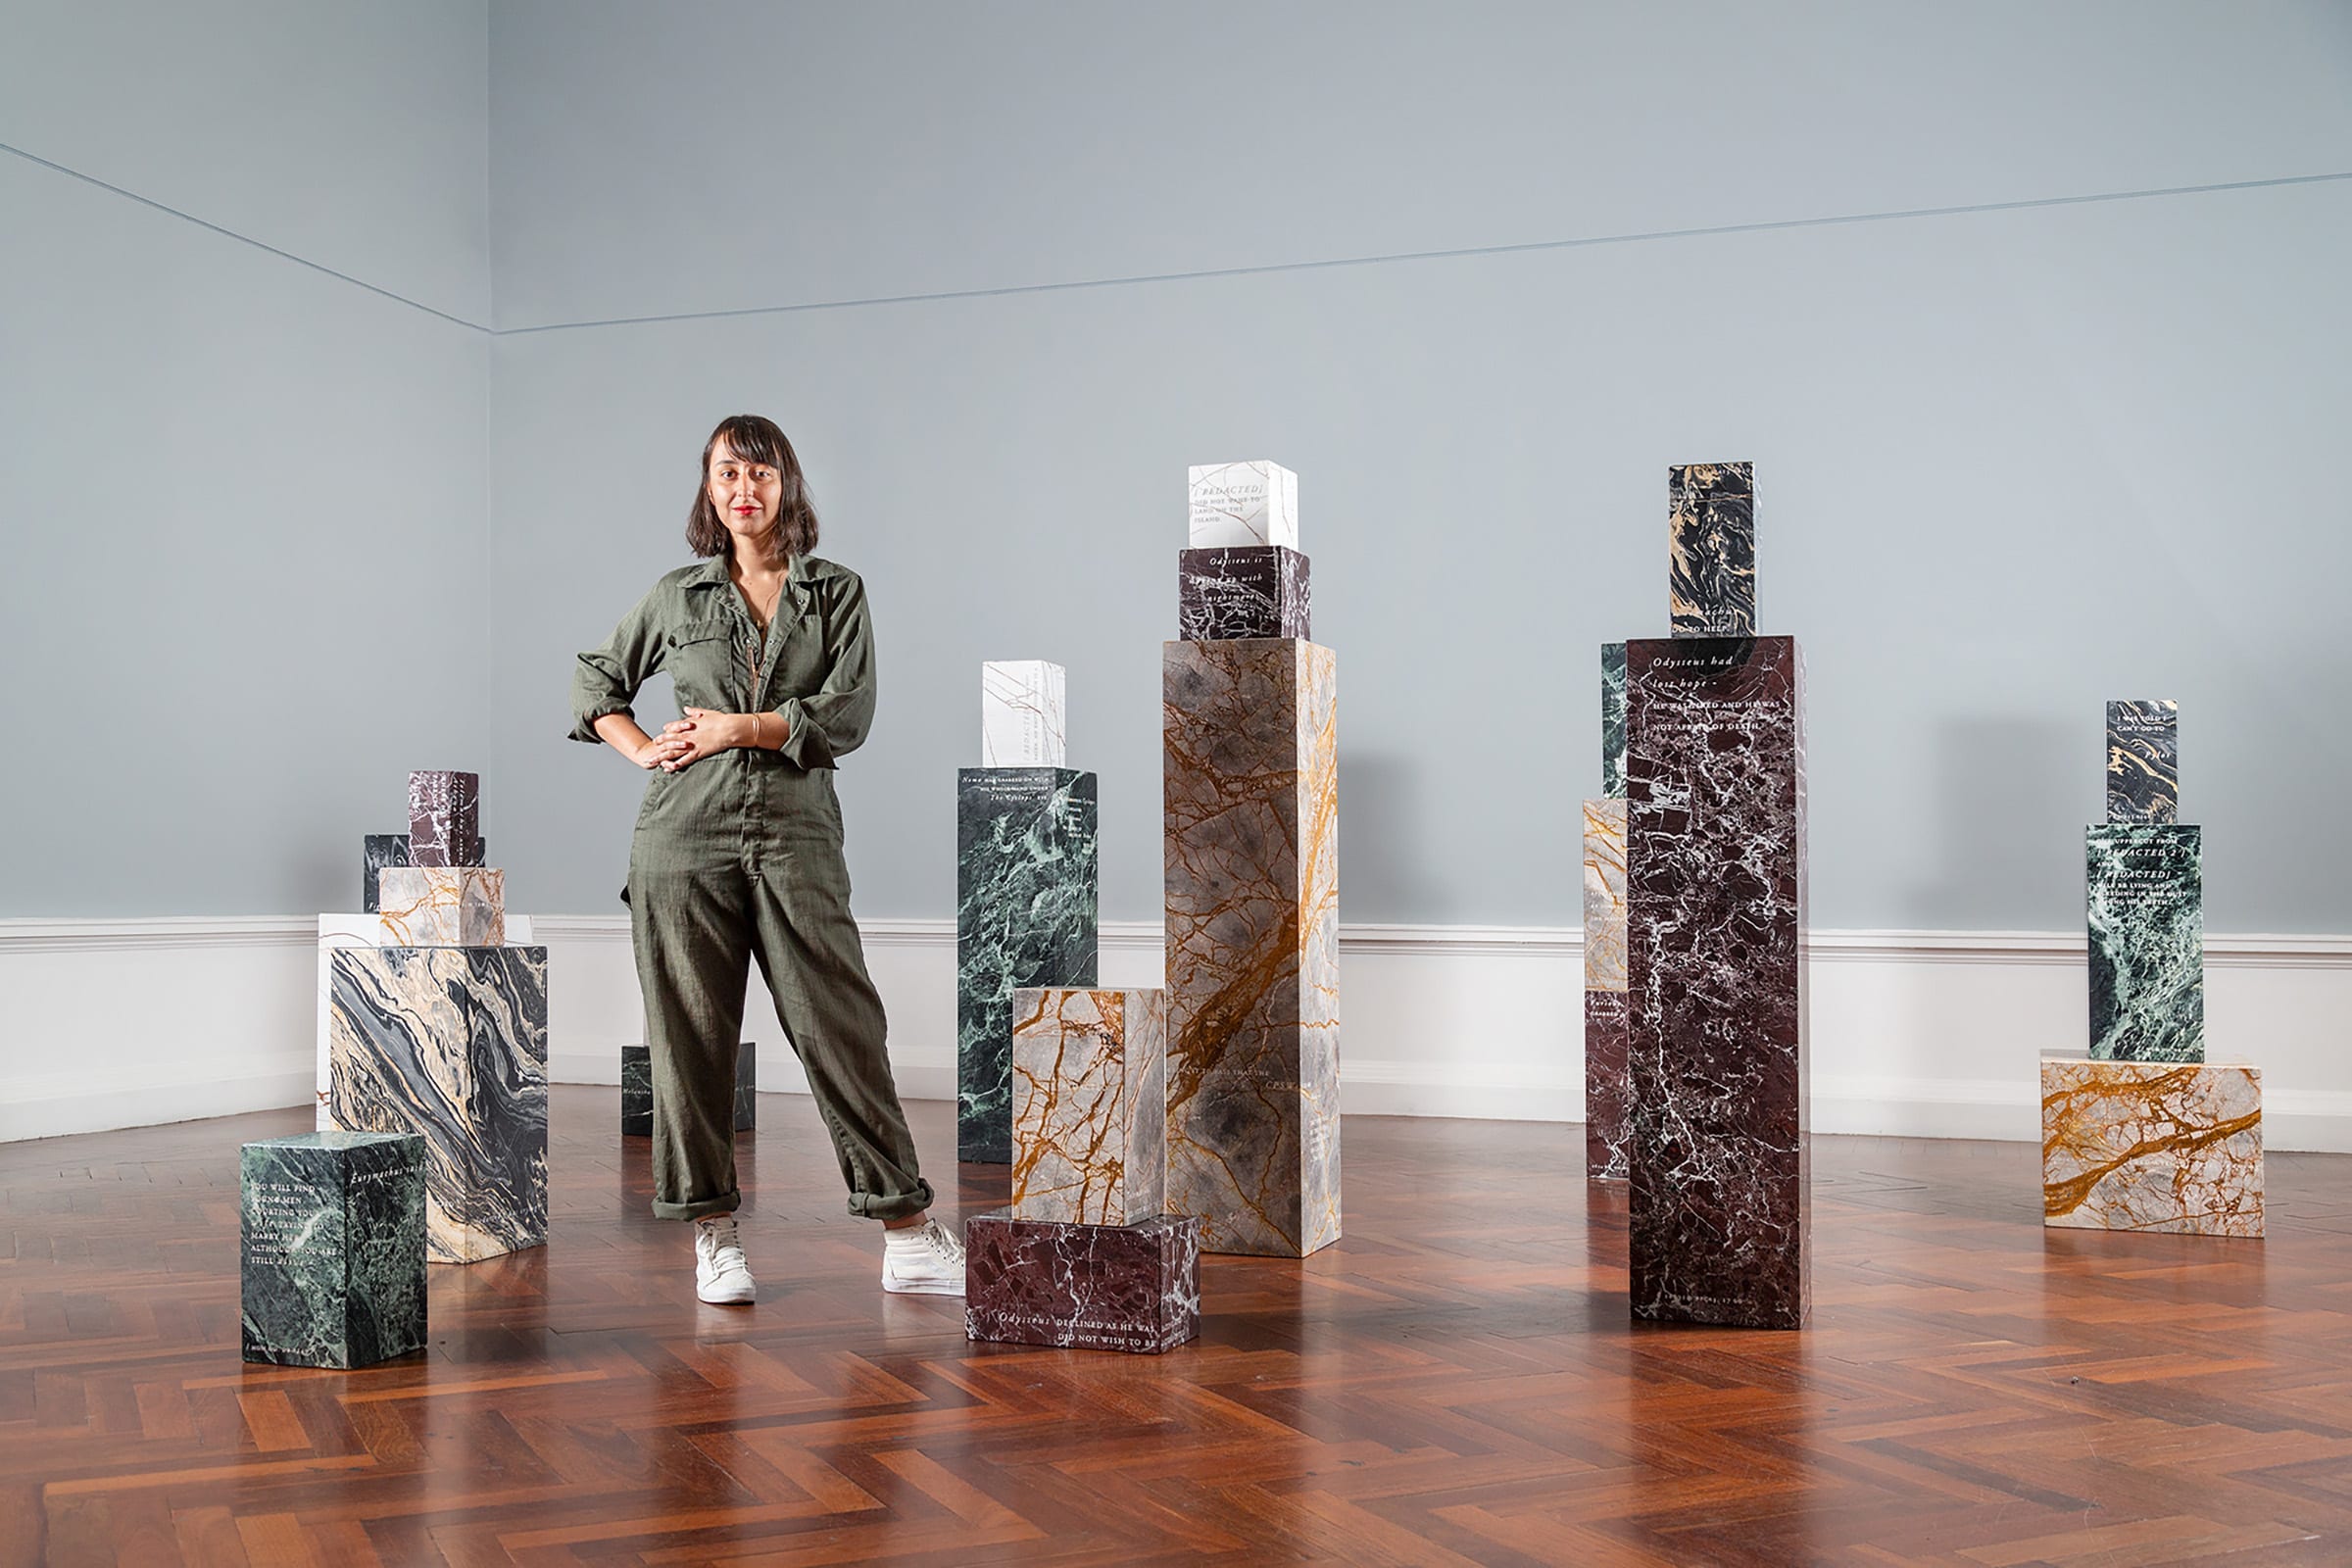 Stanislava Pinchuk with her work The Wine Dark Sea, set I at Art Gallery of South Australia, 2021. Photo by Saul Steed. Courtesy of the artist, Art Gallery of South Australia, and Yavuz Gallery.